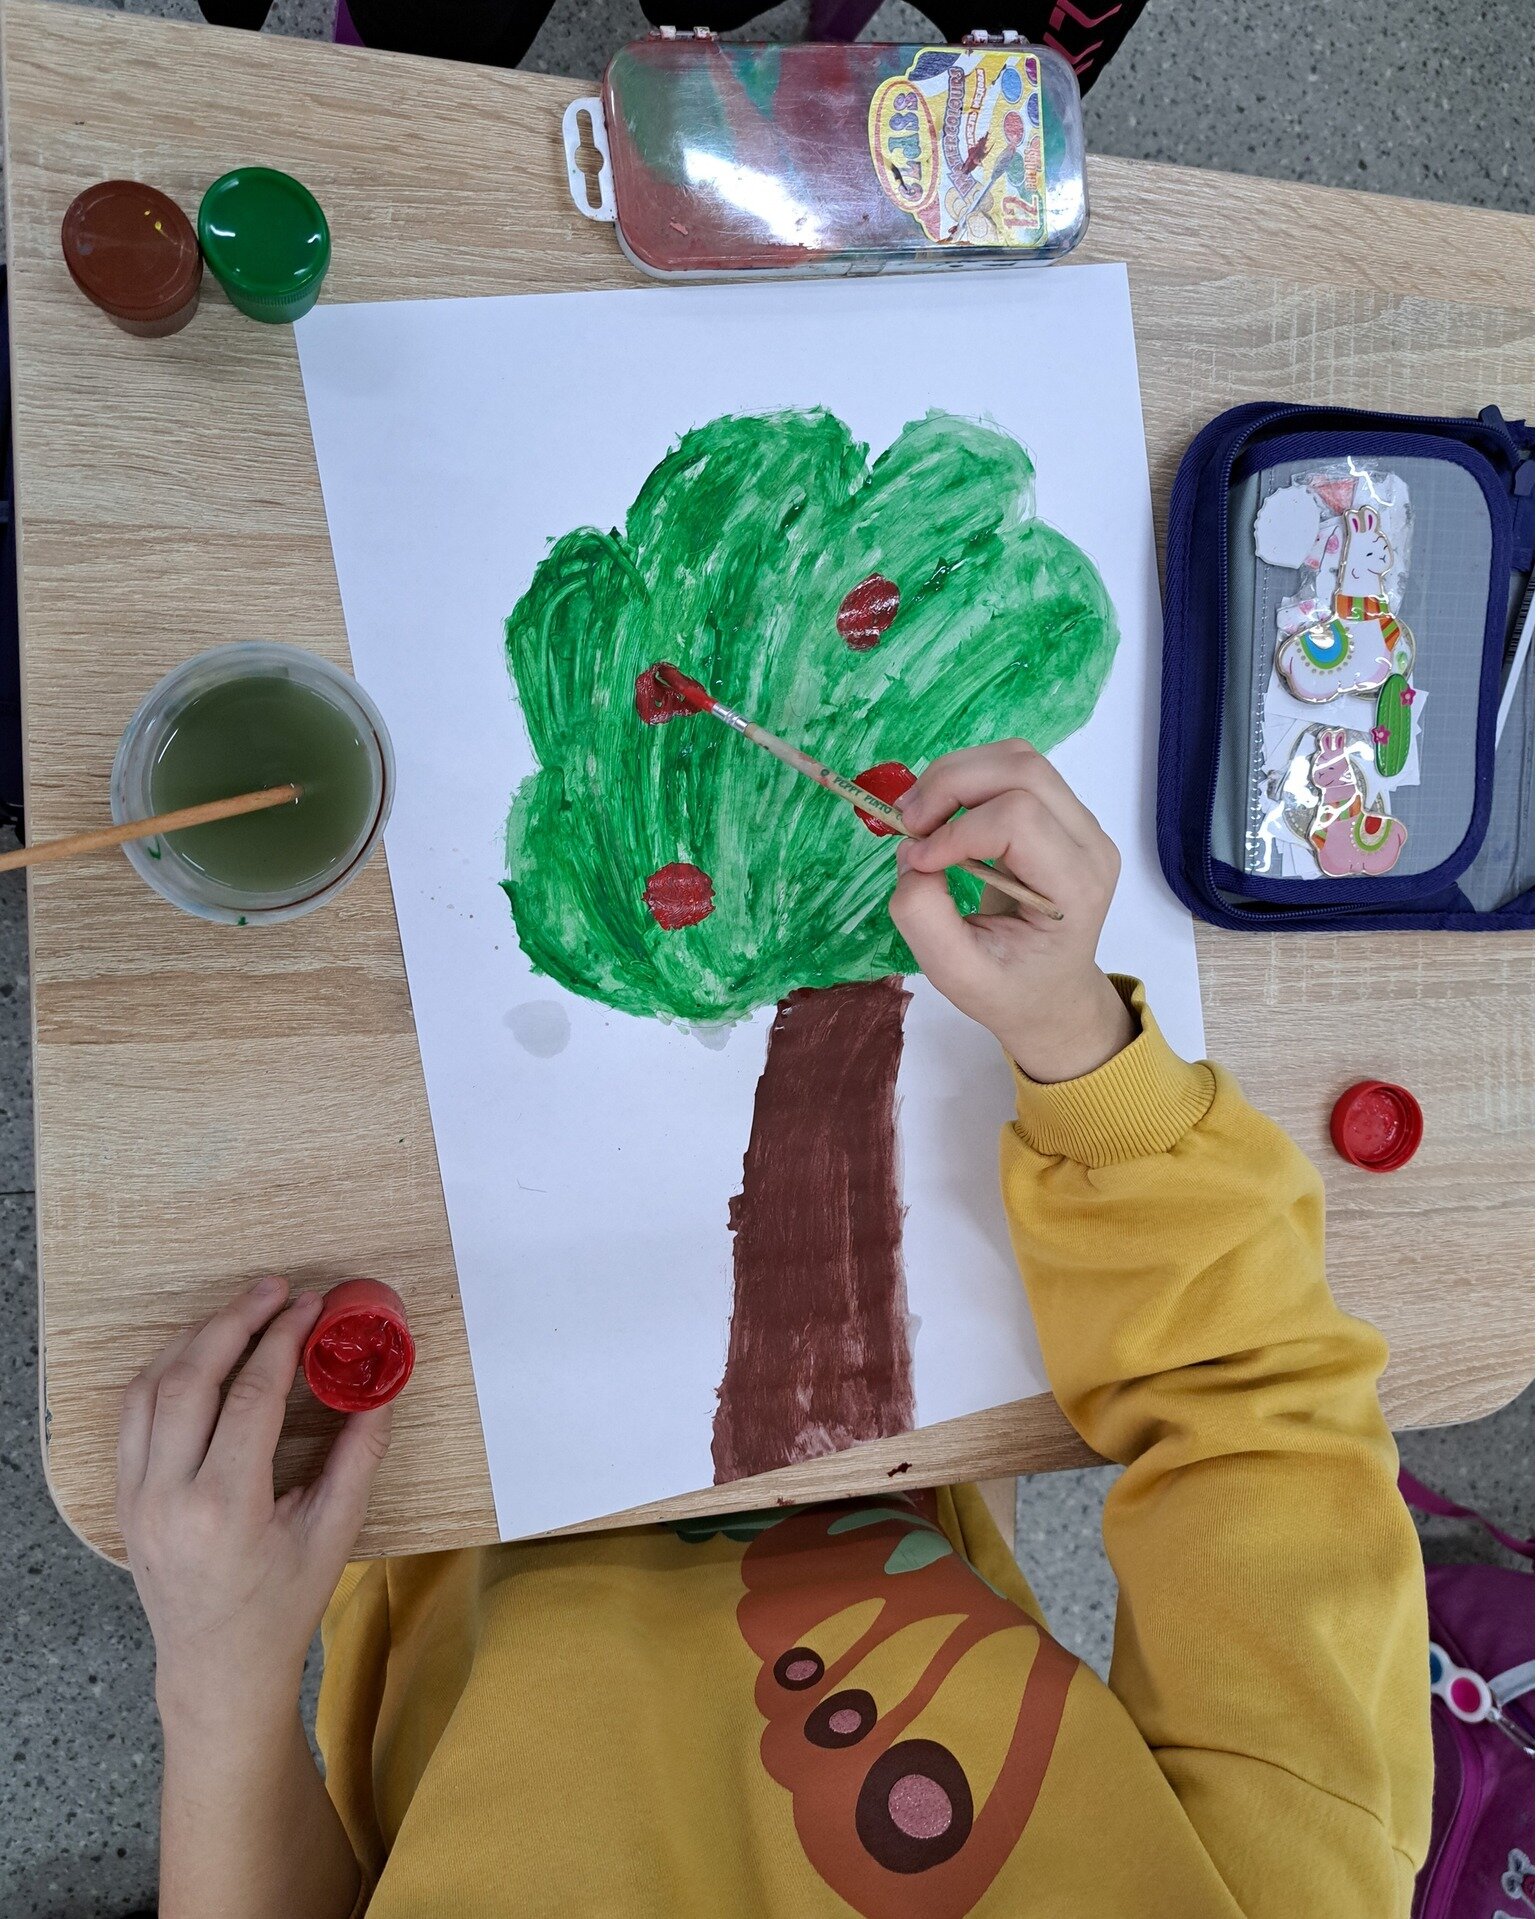 When words fail, art speaks. 🎨🖌 See how art therapy is giving hope and healing to children in Ukraine who have experienced unimaginable trauma. In this &quot;Tree of Power&quot; session, children tapped into their inner creativity to draw their own